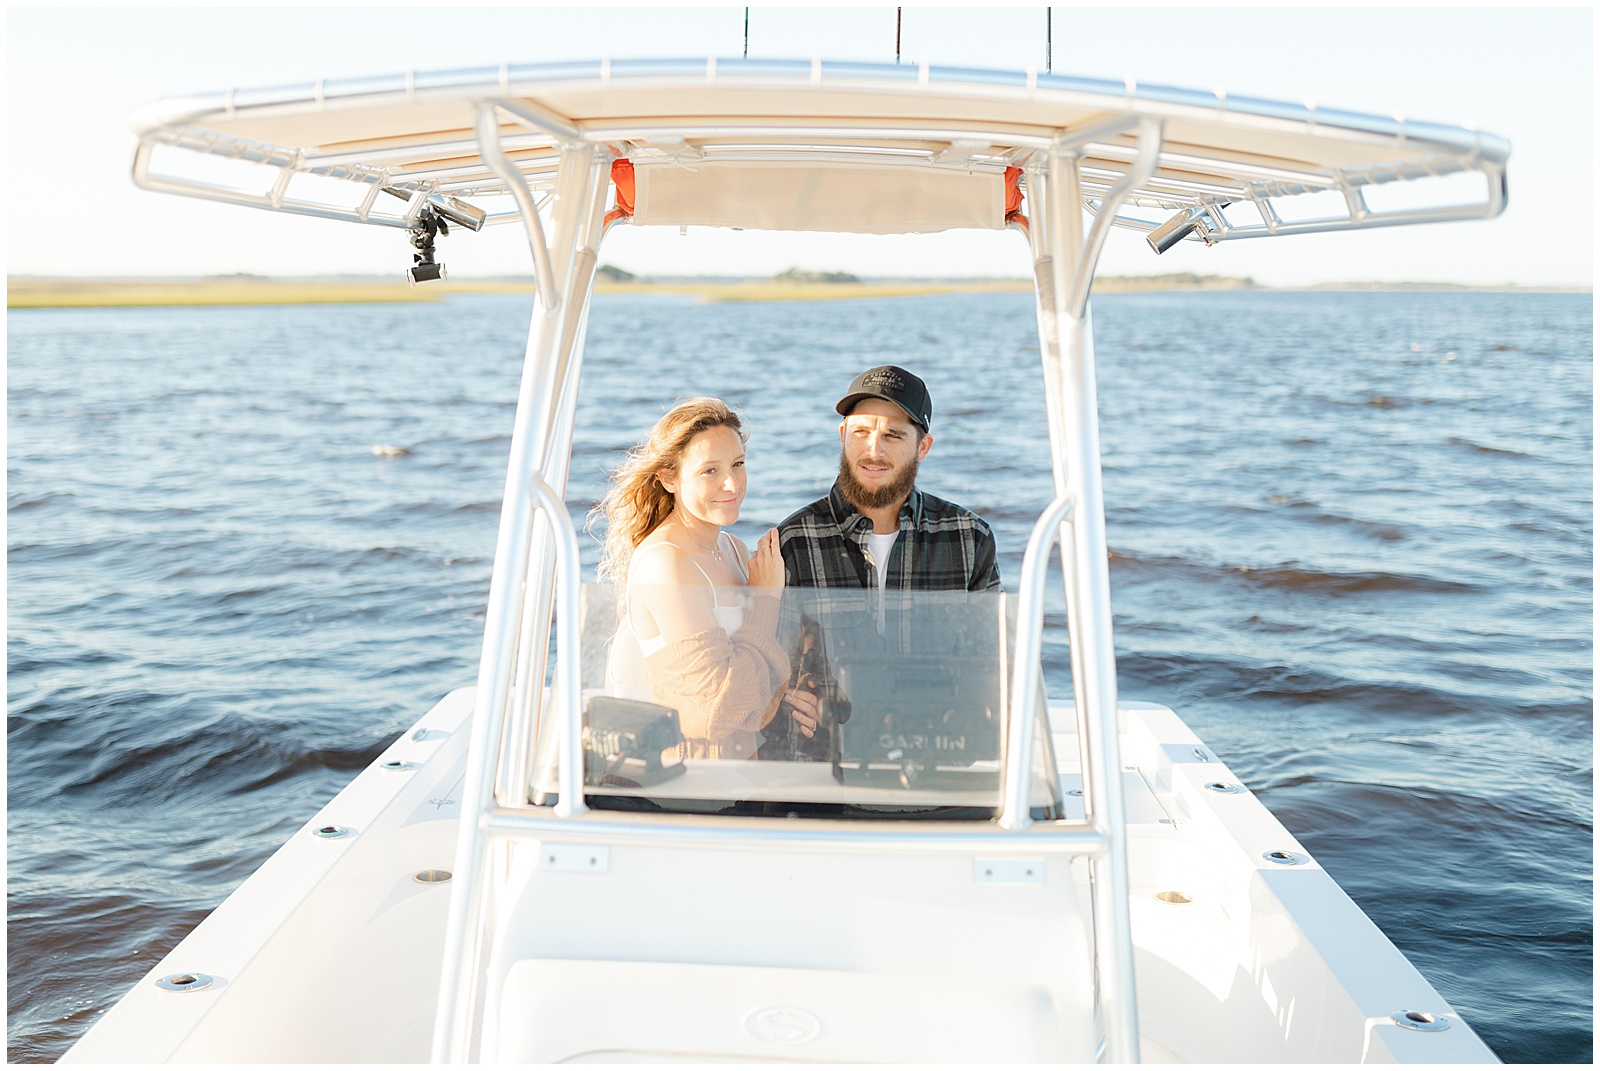 jacksonville florida couples boat anniversary photo session with tabitha baldwin photography_0001.jpg